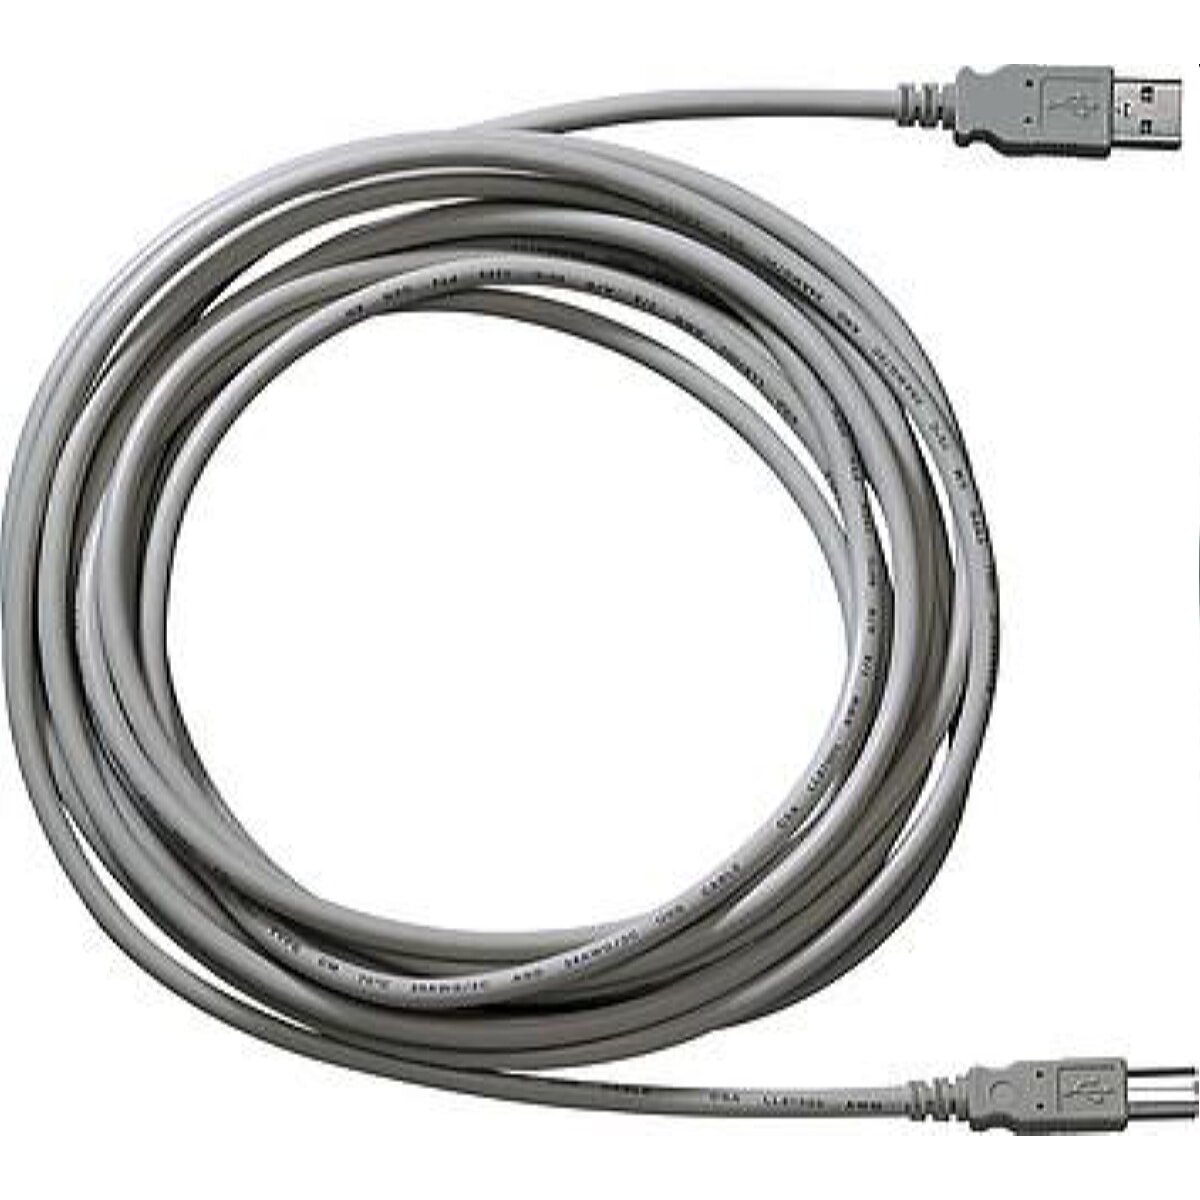 Gira connection cable 090300 USB 3m